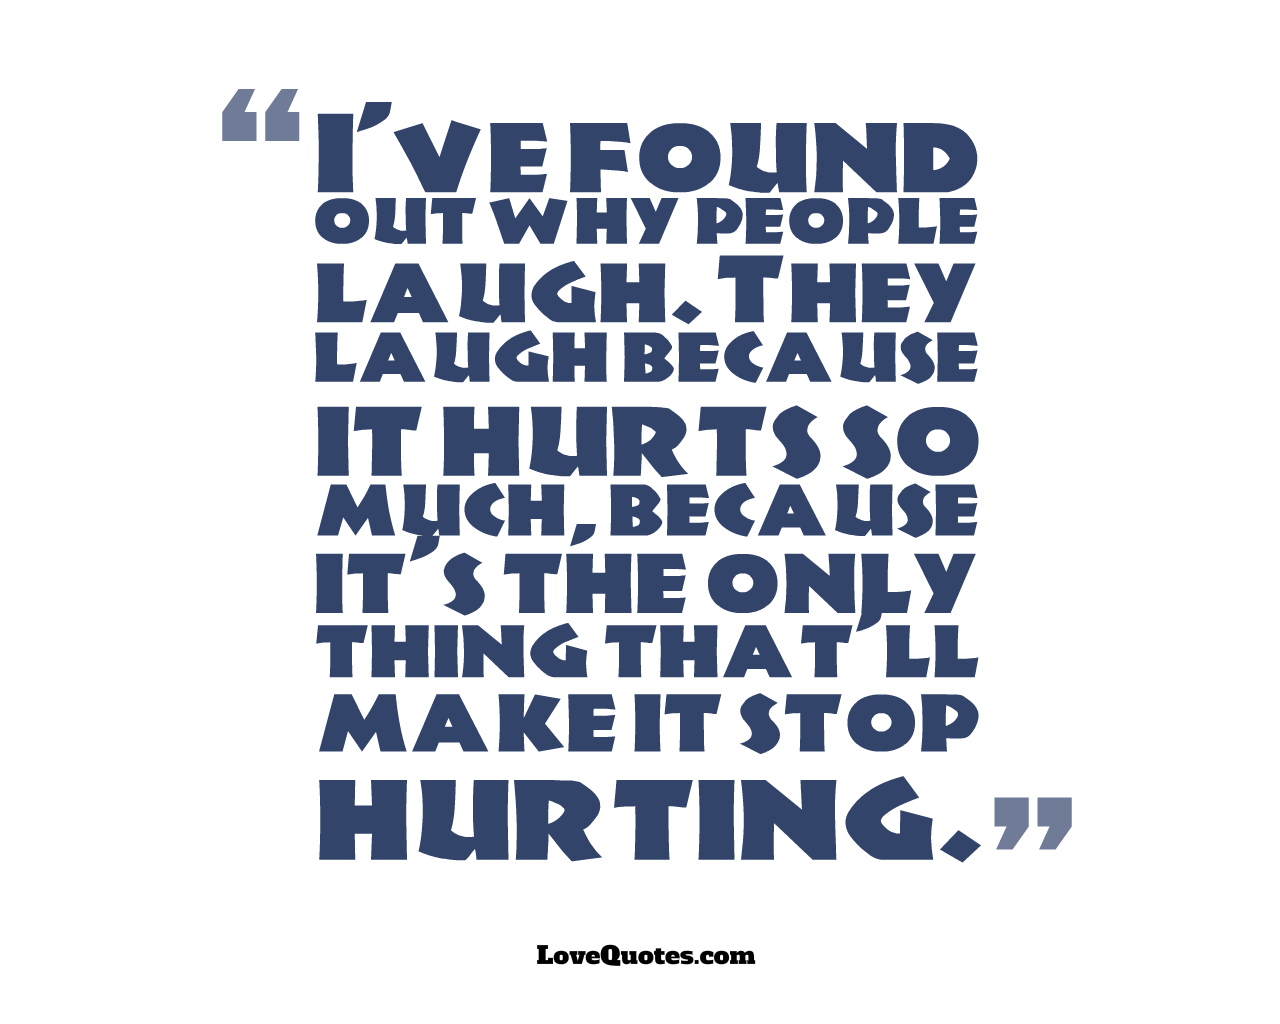 Why People Laugh